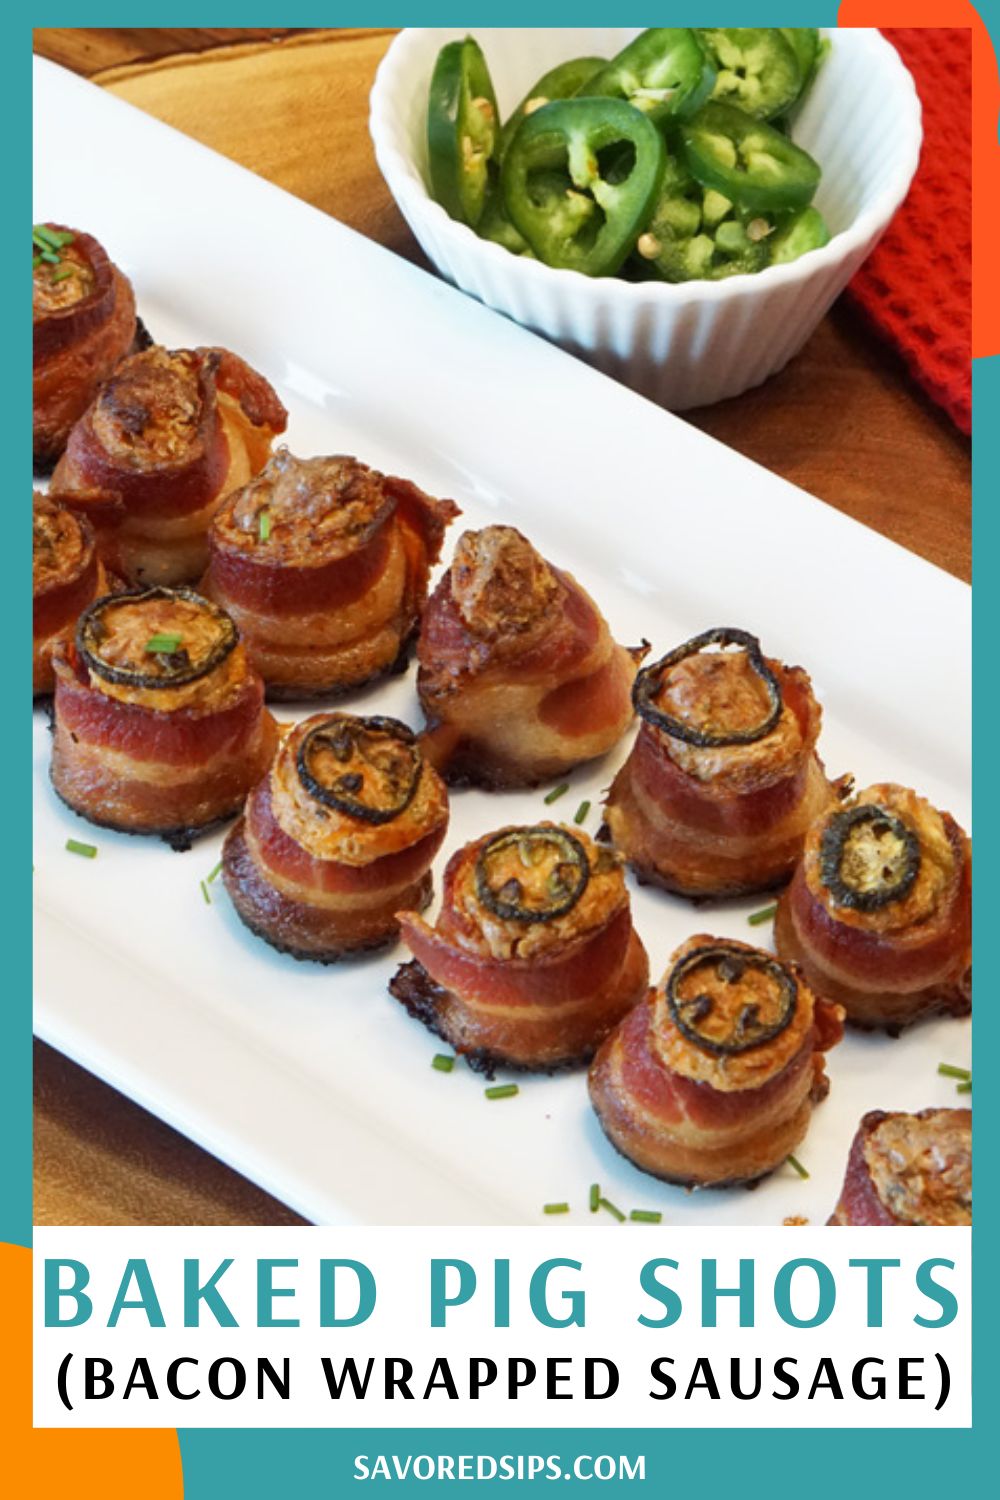 Bacon wrapped sausage with cream cheese filling